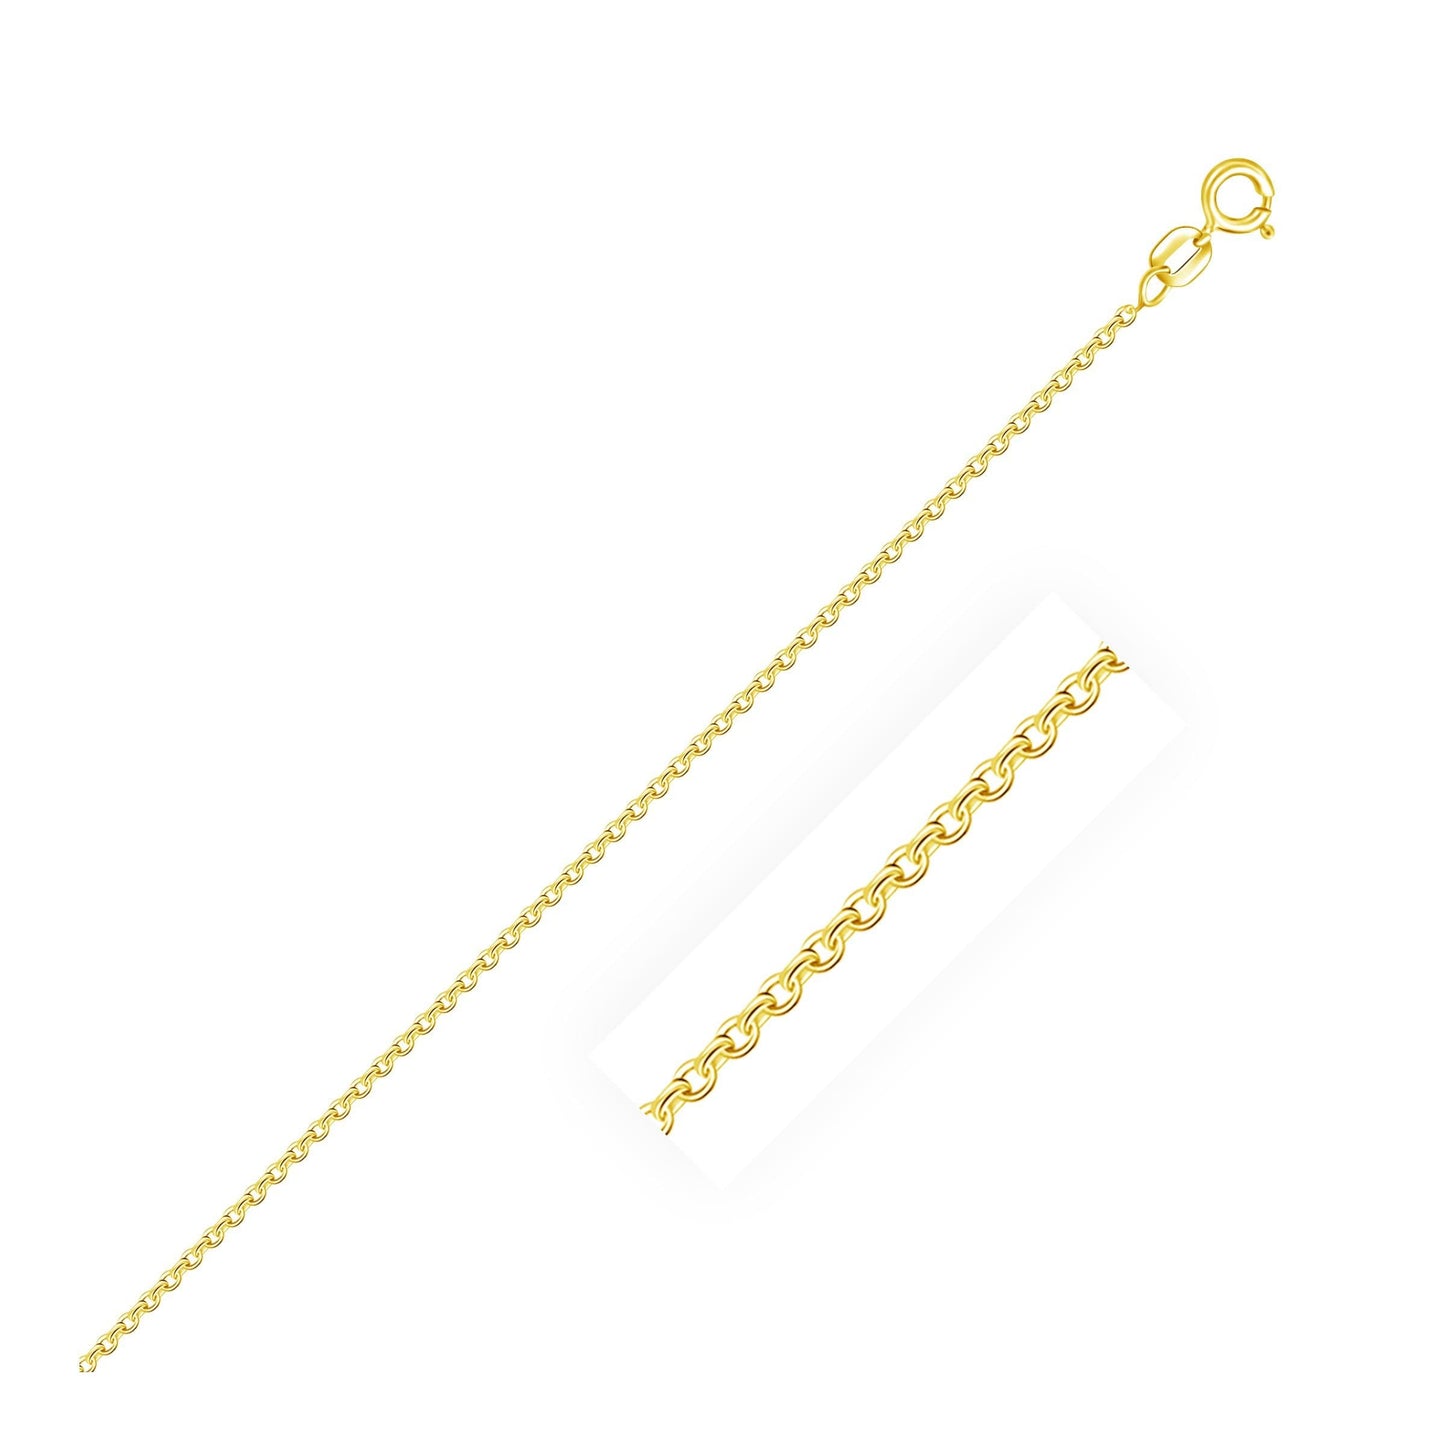 14k Yellow Gold Cable Link Chain in 1.1 mm